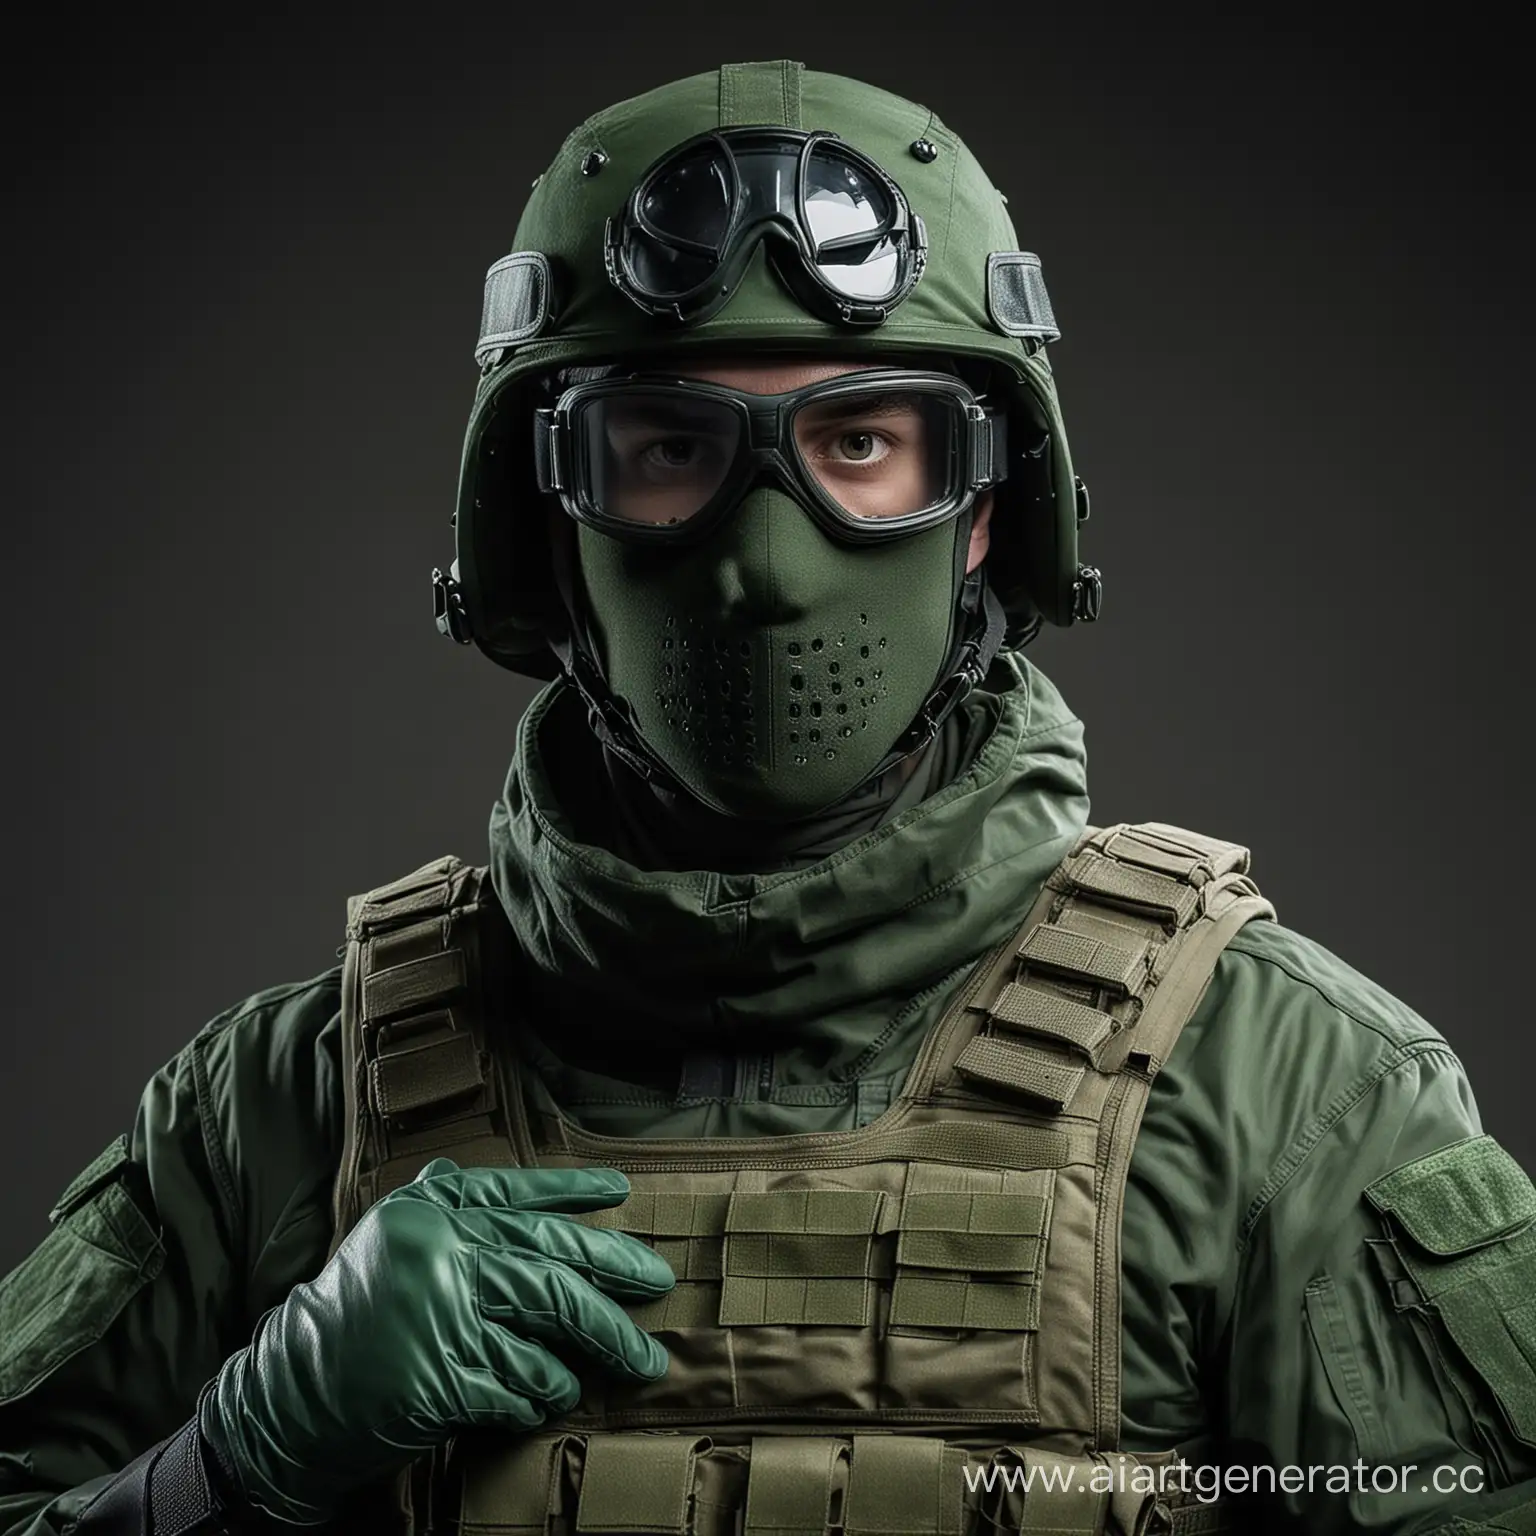 Russian soldier dressed in a dark green tactical vest and green gloves, and his military uniform is green, a green helmet and a dark mask covering his entire face, and green tactical protective ballistic goggle.